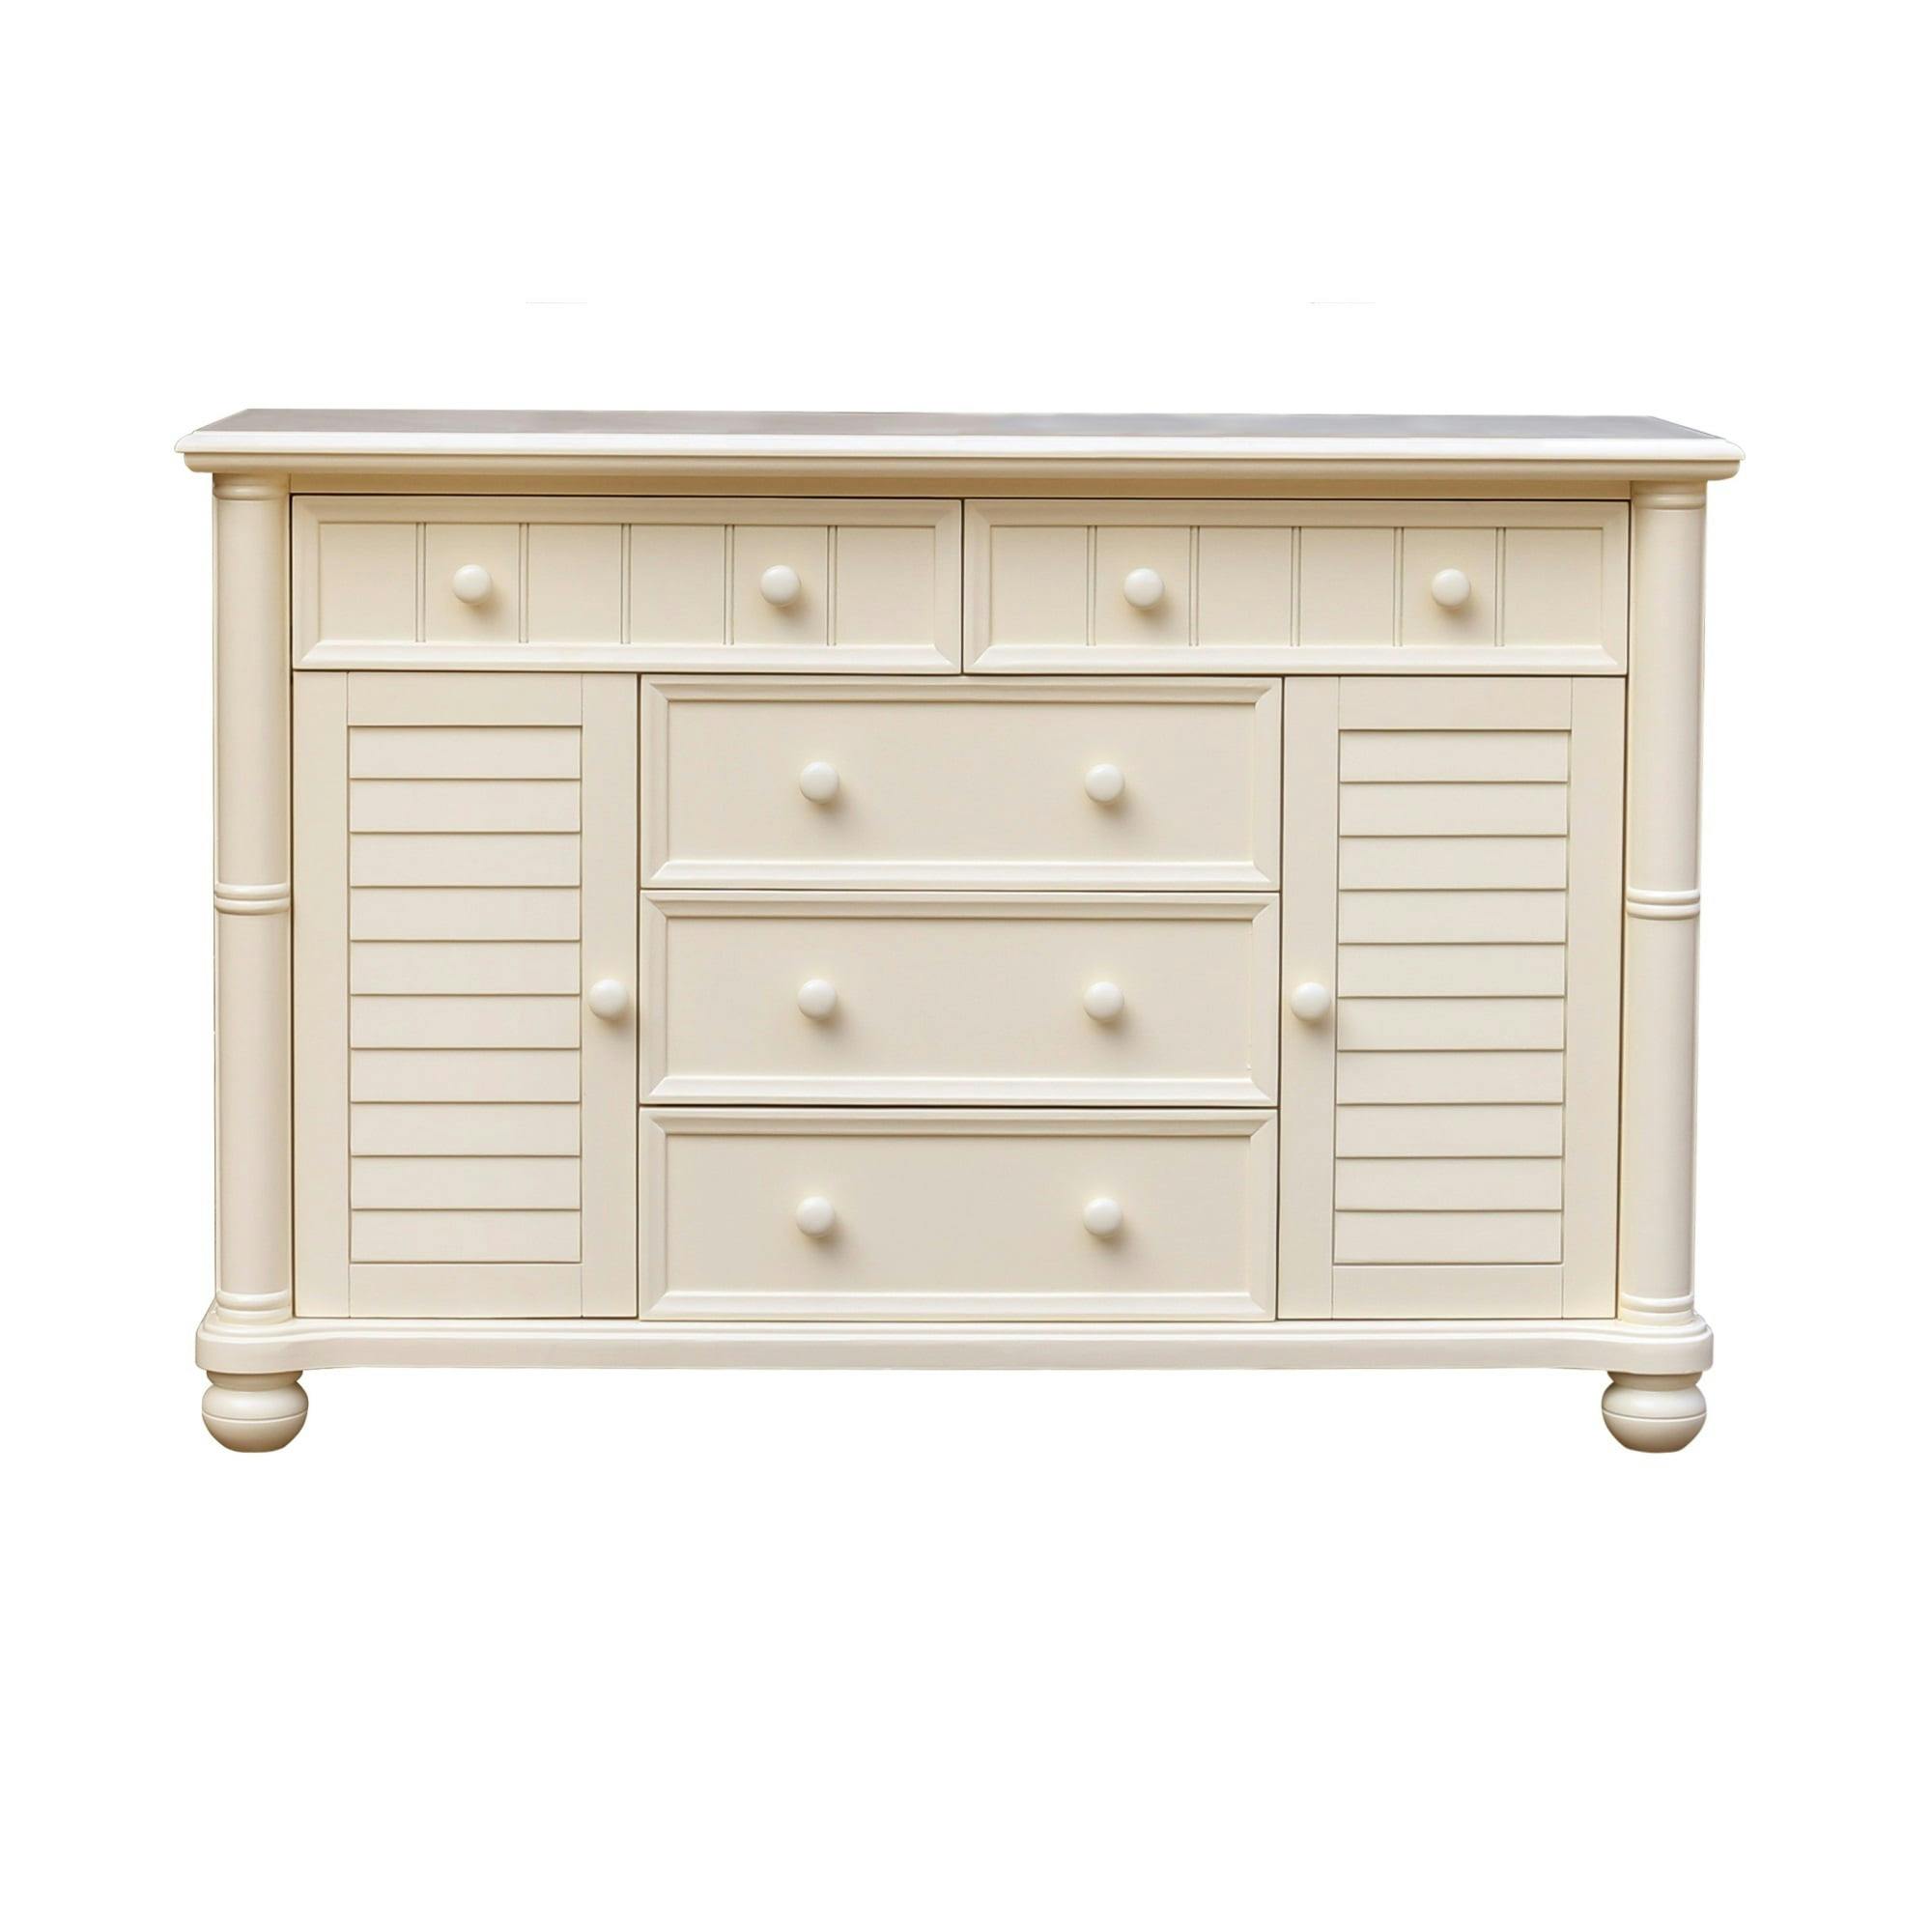 Coastal Cottage Charm Antique White Wood Dresser with Drawers